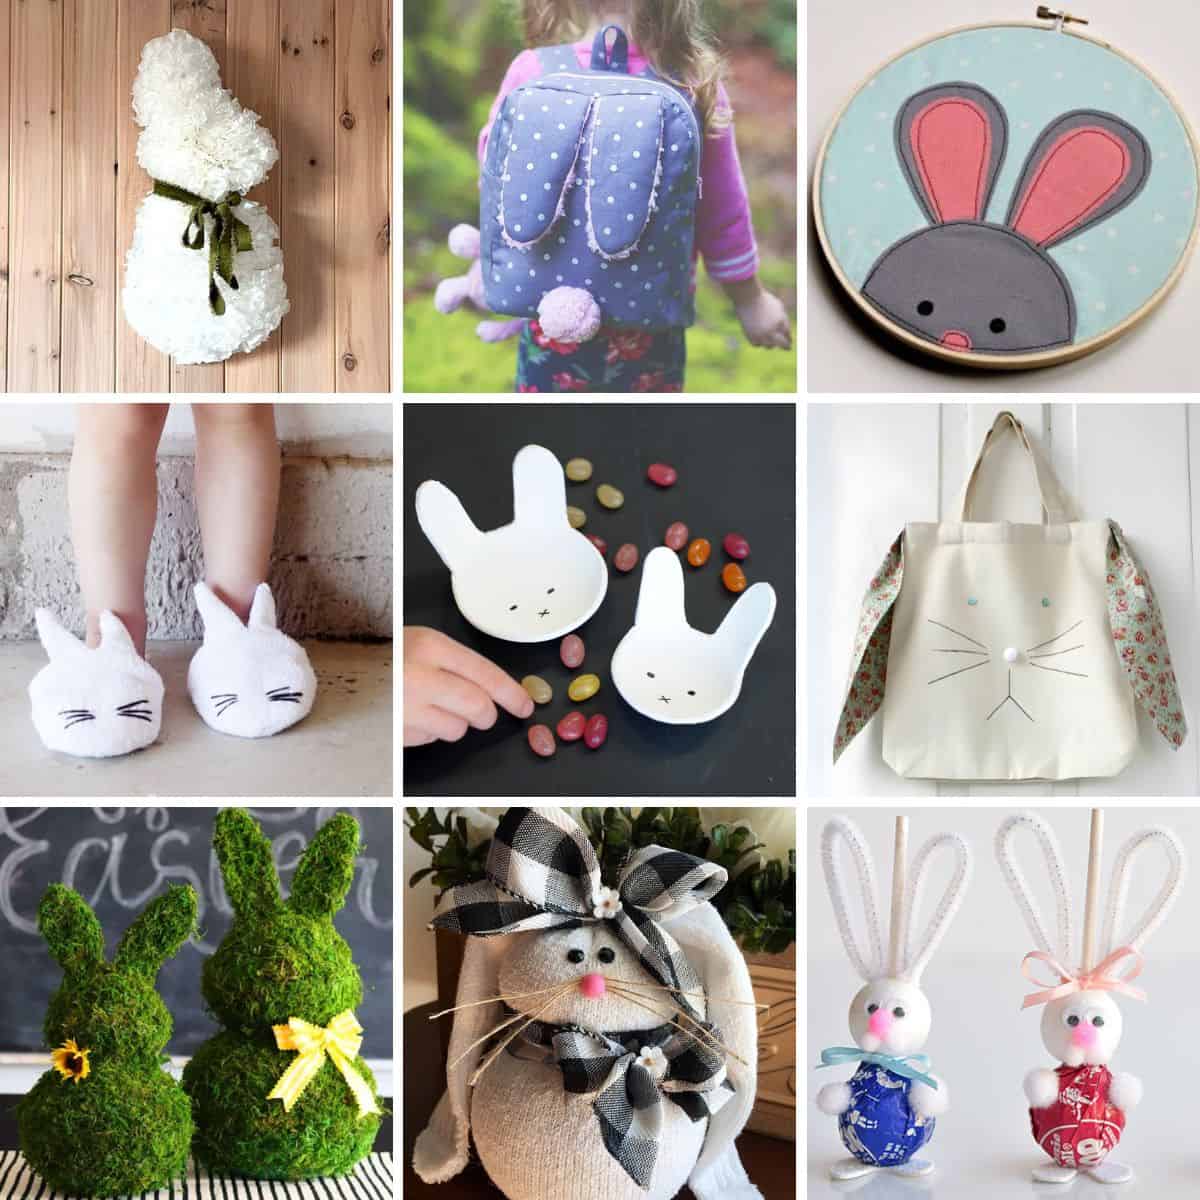 27 Cute Easter Bunny Crafts - The Crafty Blog Stalker